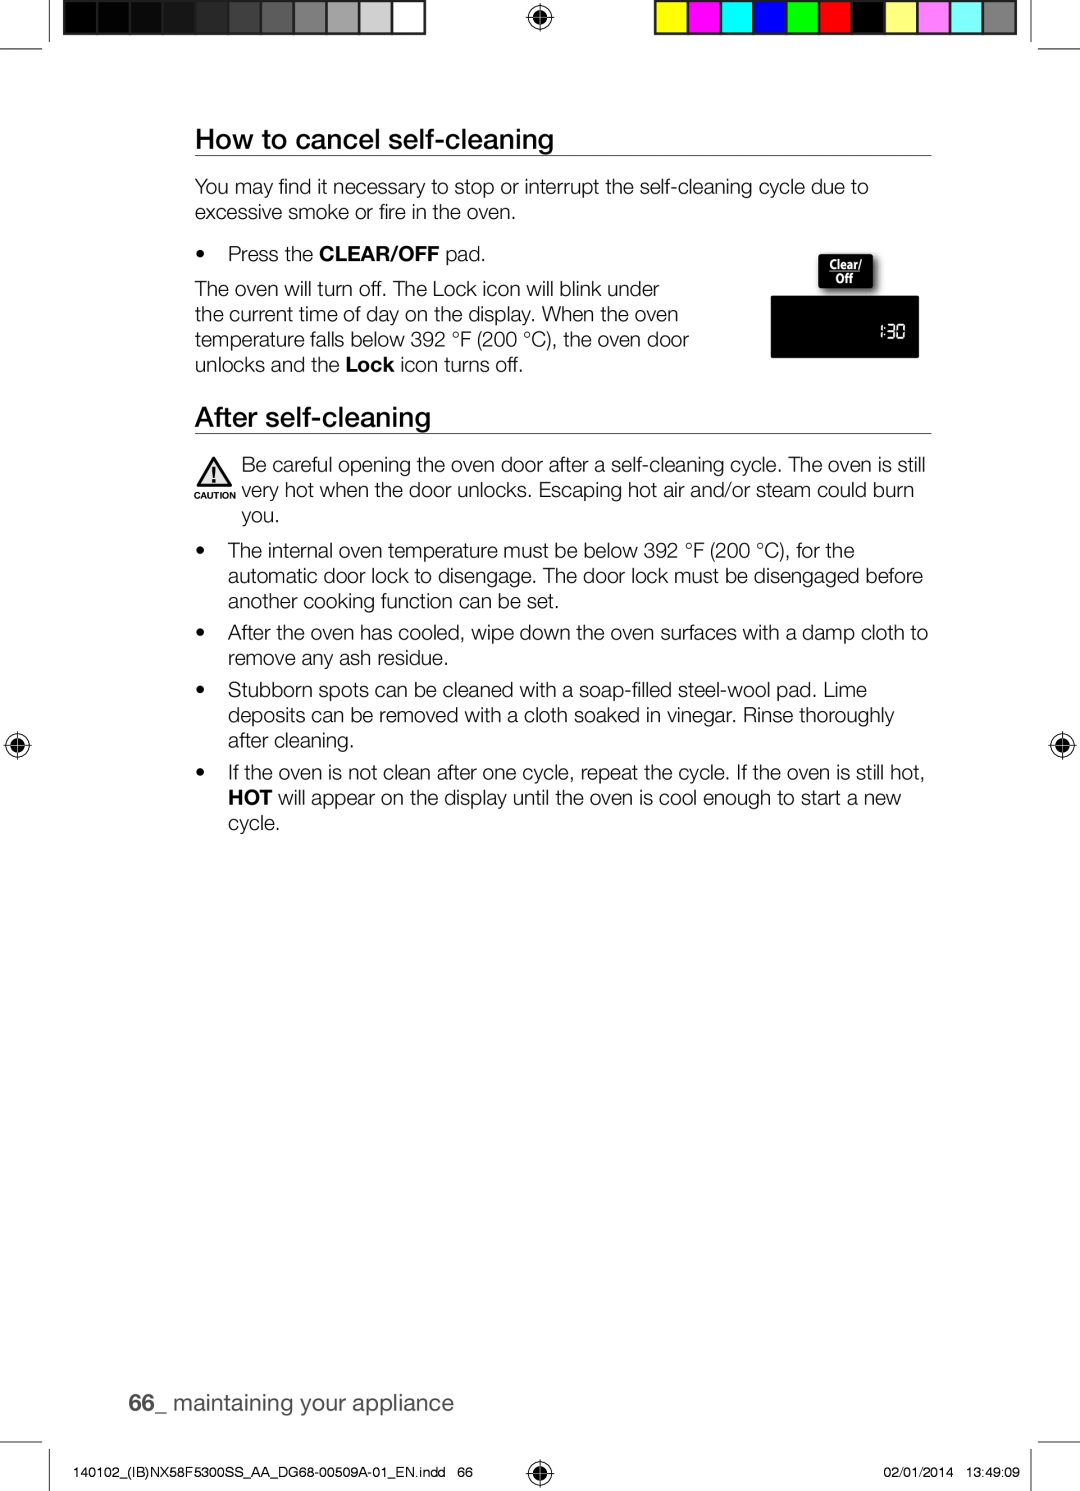 Samsung NX58F5500SW user manual How to cancel self-cleaning, After self-cleaning, maintaining your appliance 